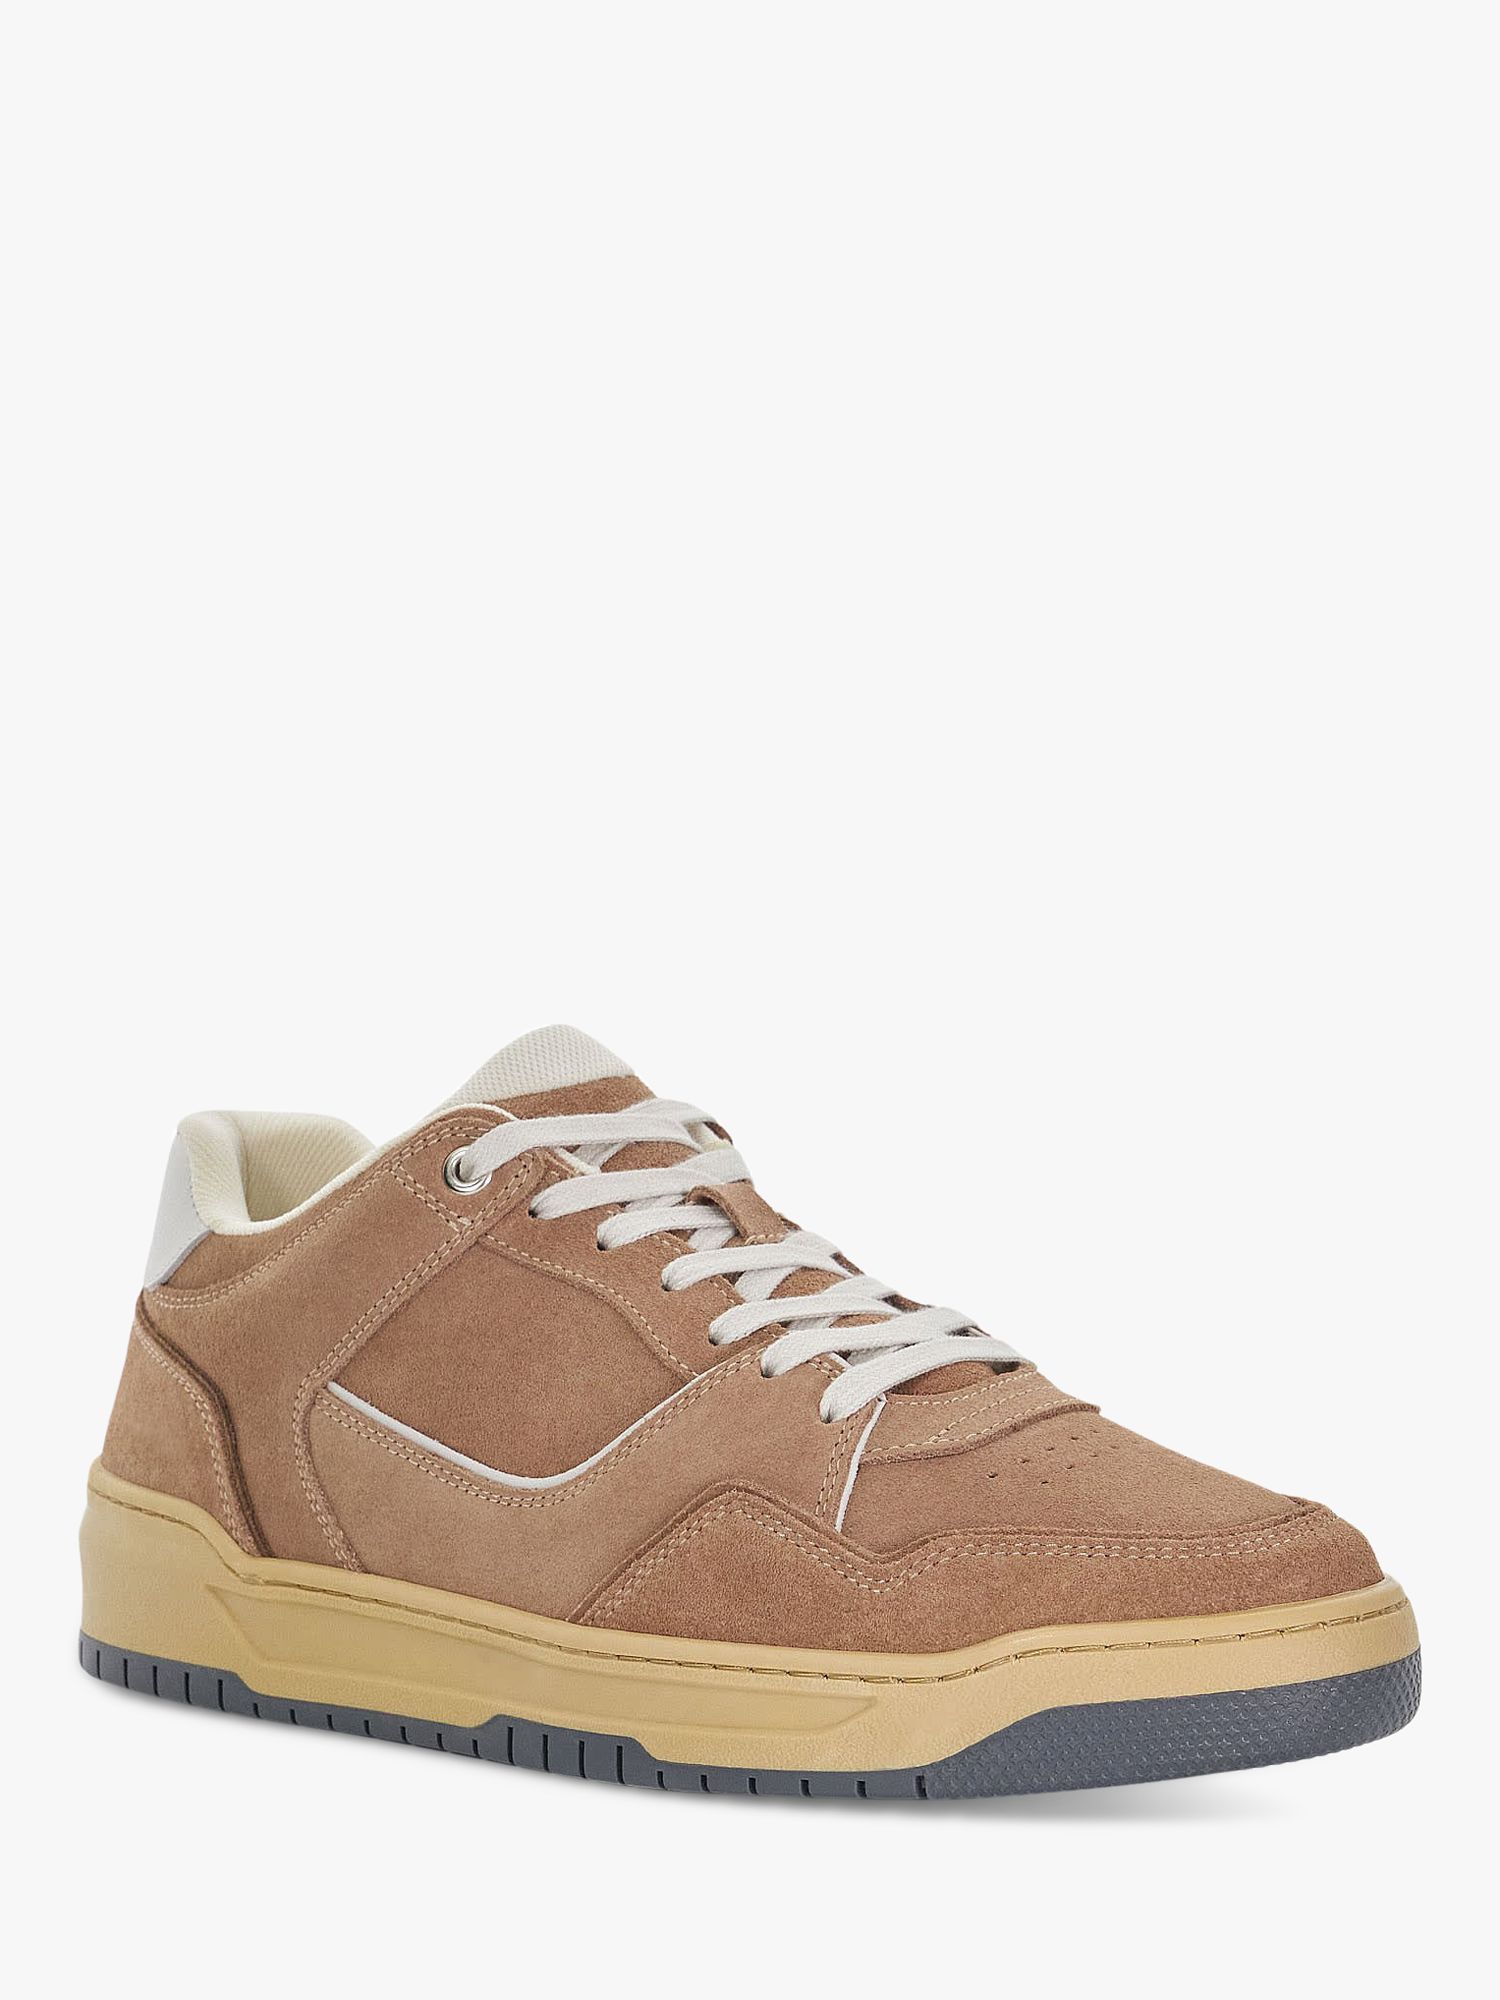 Dune Tainted Suede Trainers, Beige, 7